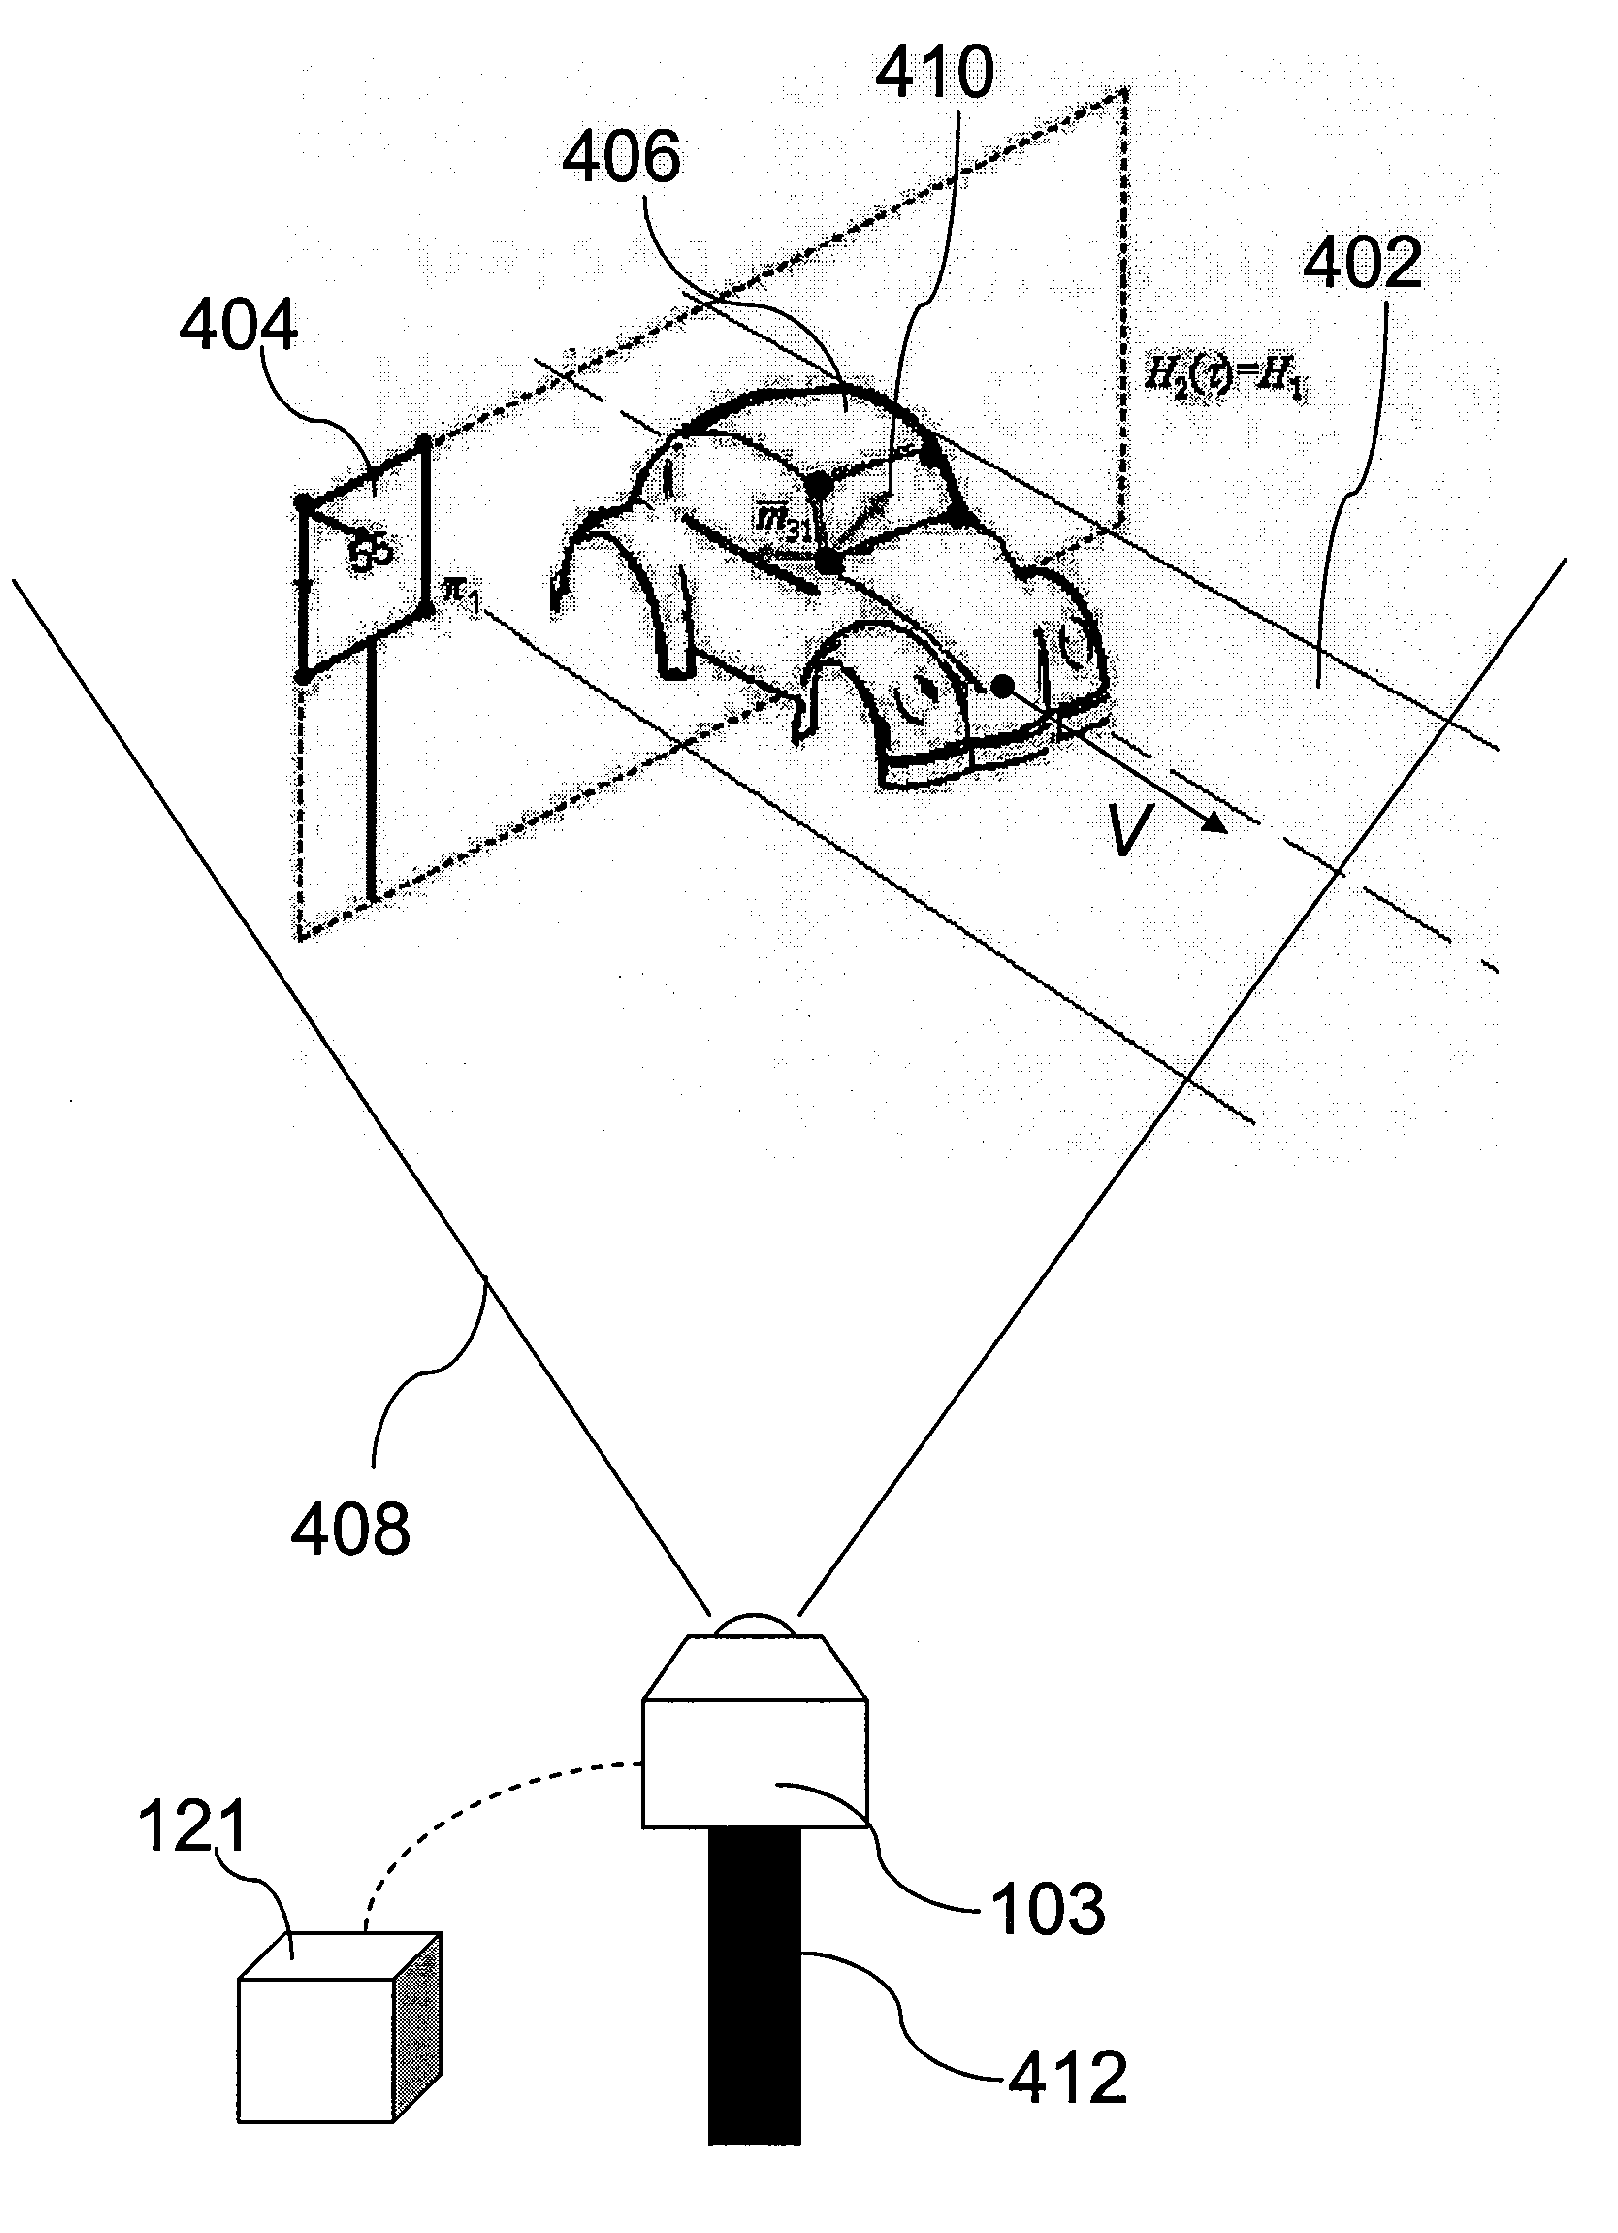 Passive single camera imaging system for determining motor vehicle speed